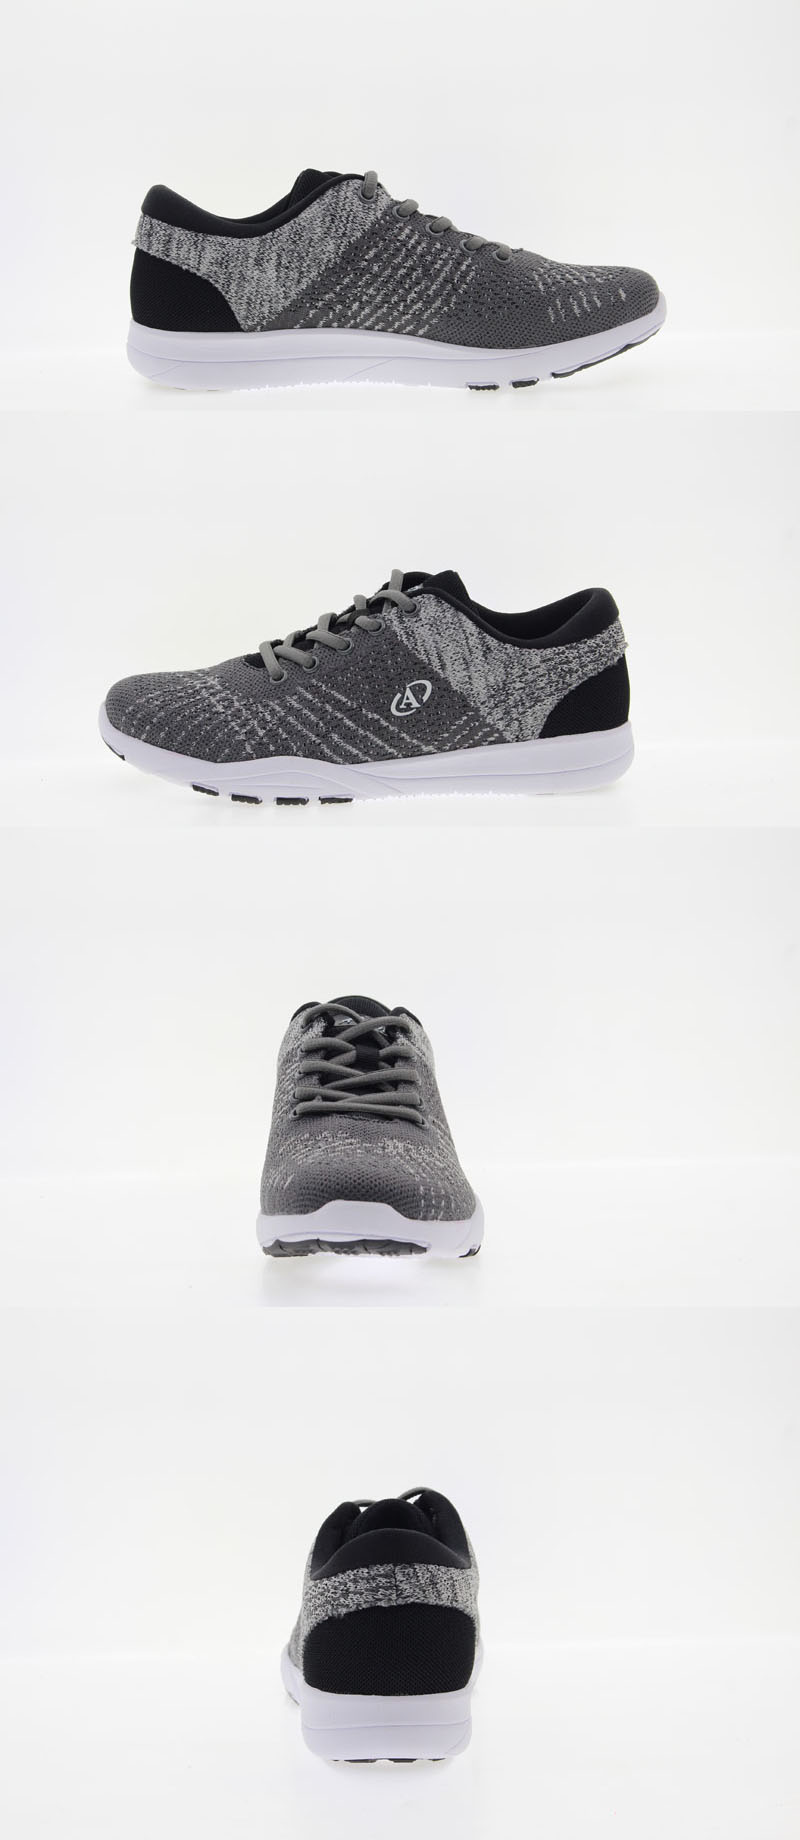 The grey system shoes for you